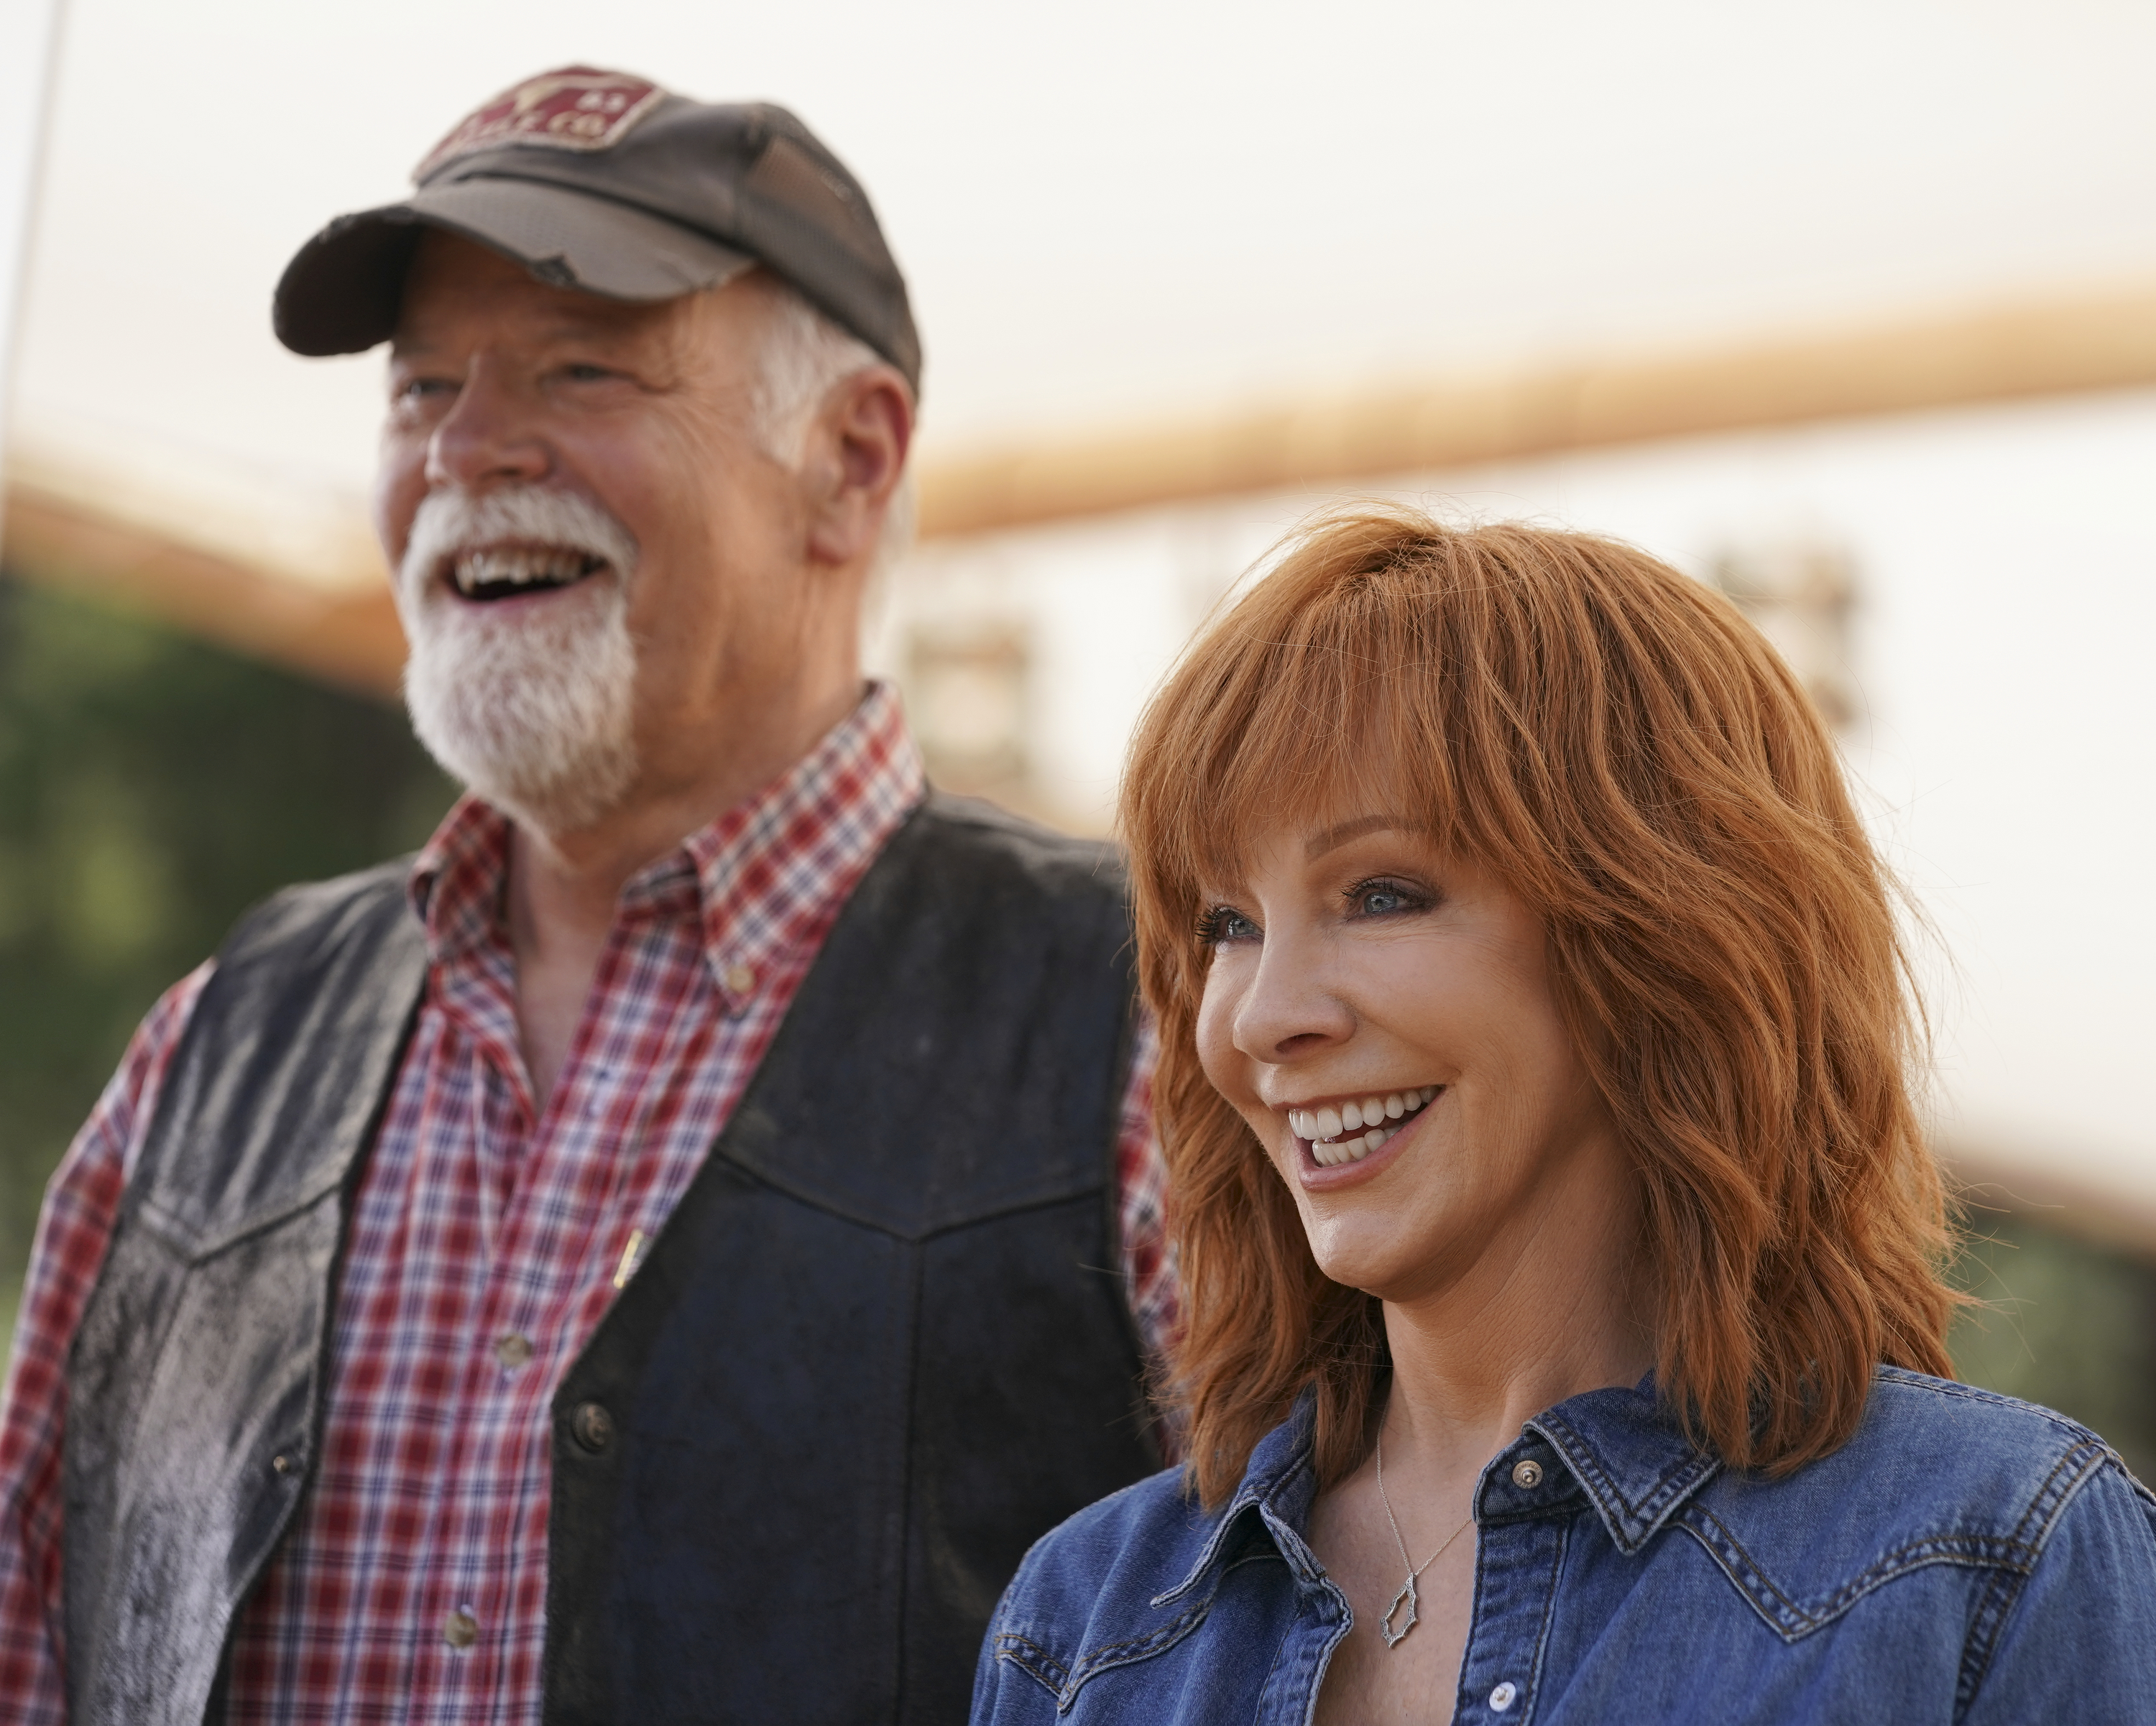 Reba McEntire and Rex Linn in "Big Sky," 2022 | Source: Getty Images